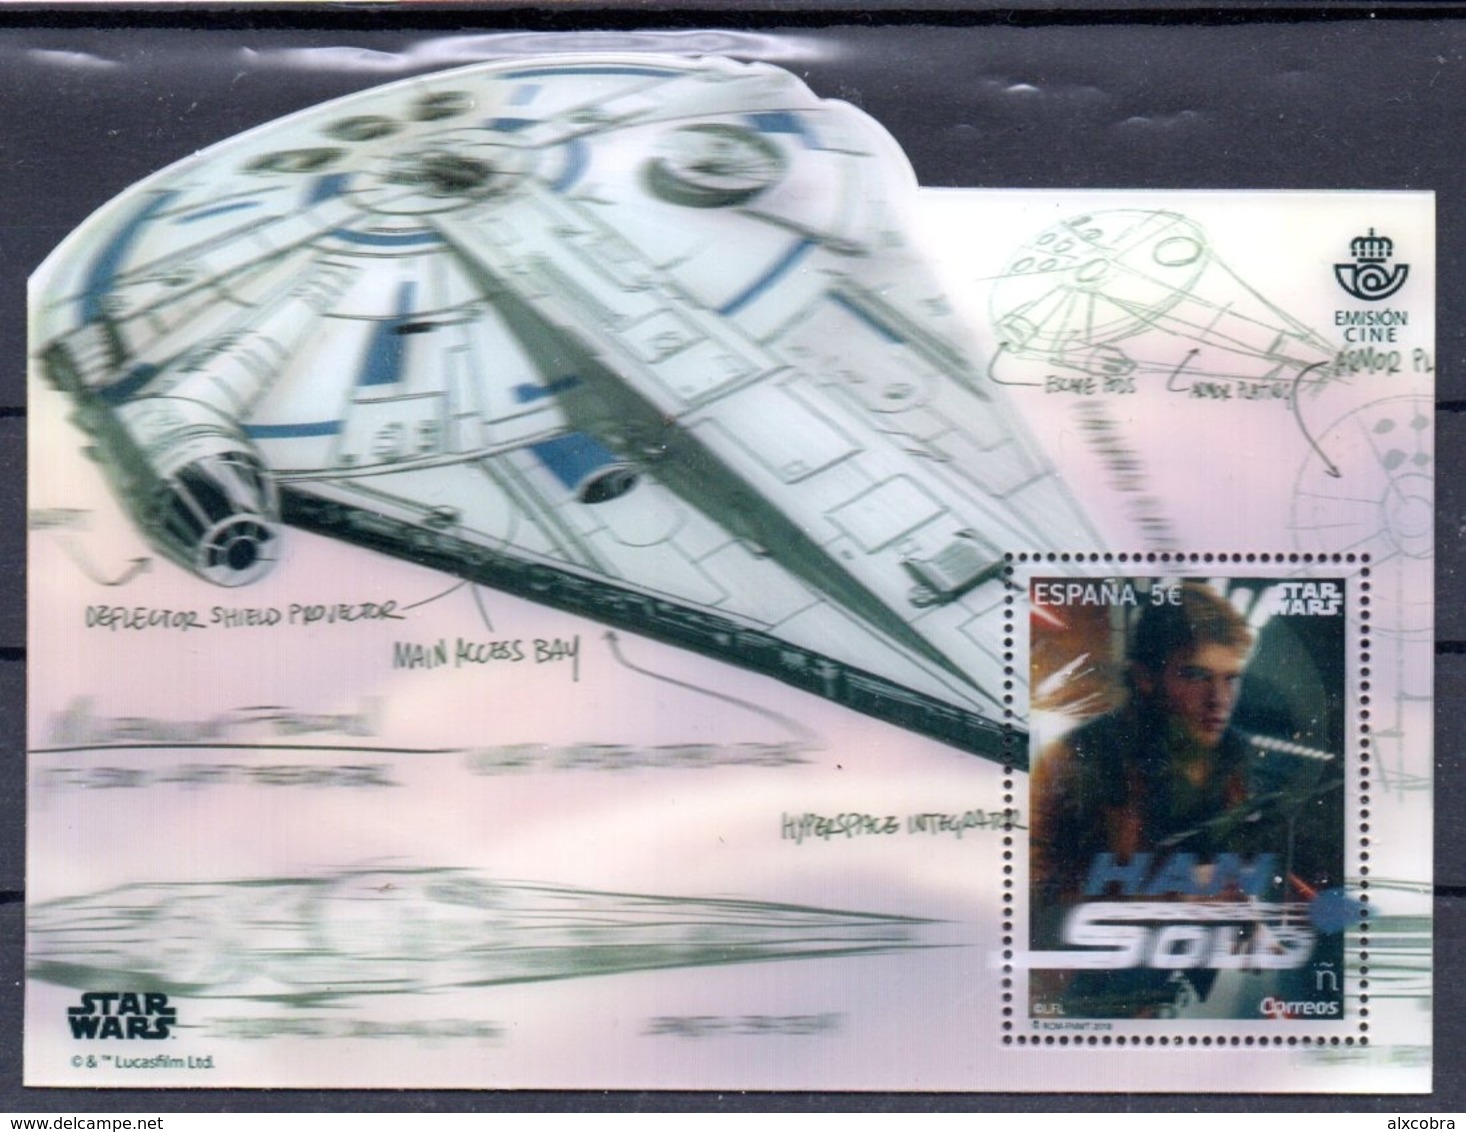 Spain Han Solo Star Wars 2018 M/S Holographic MNH - Hologramas